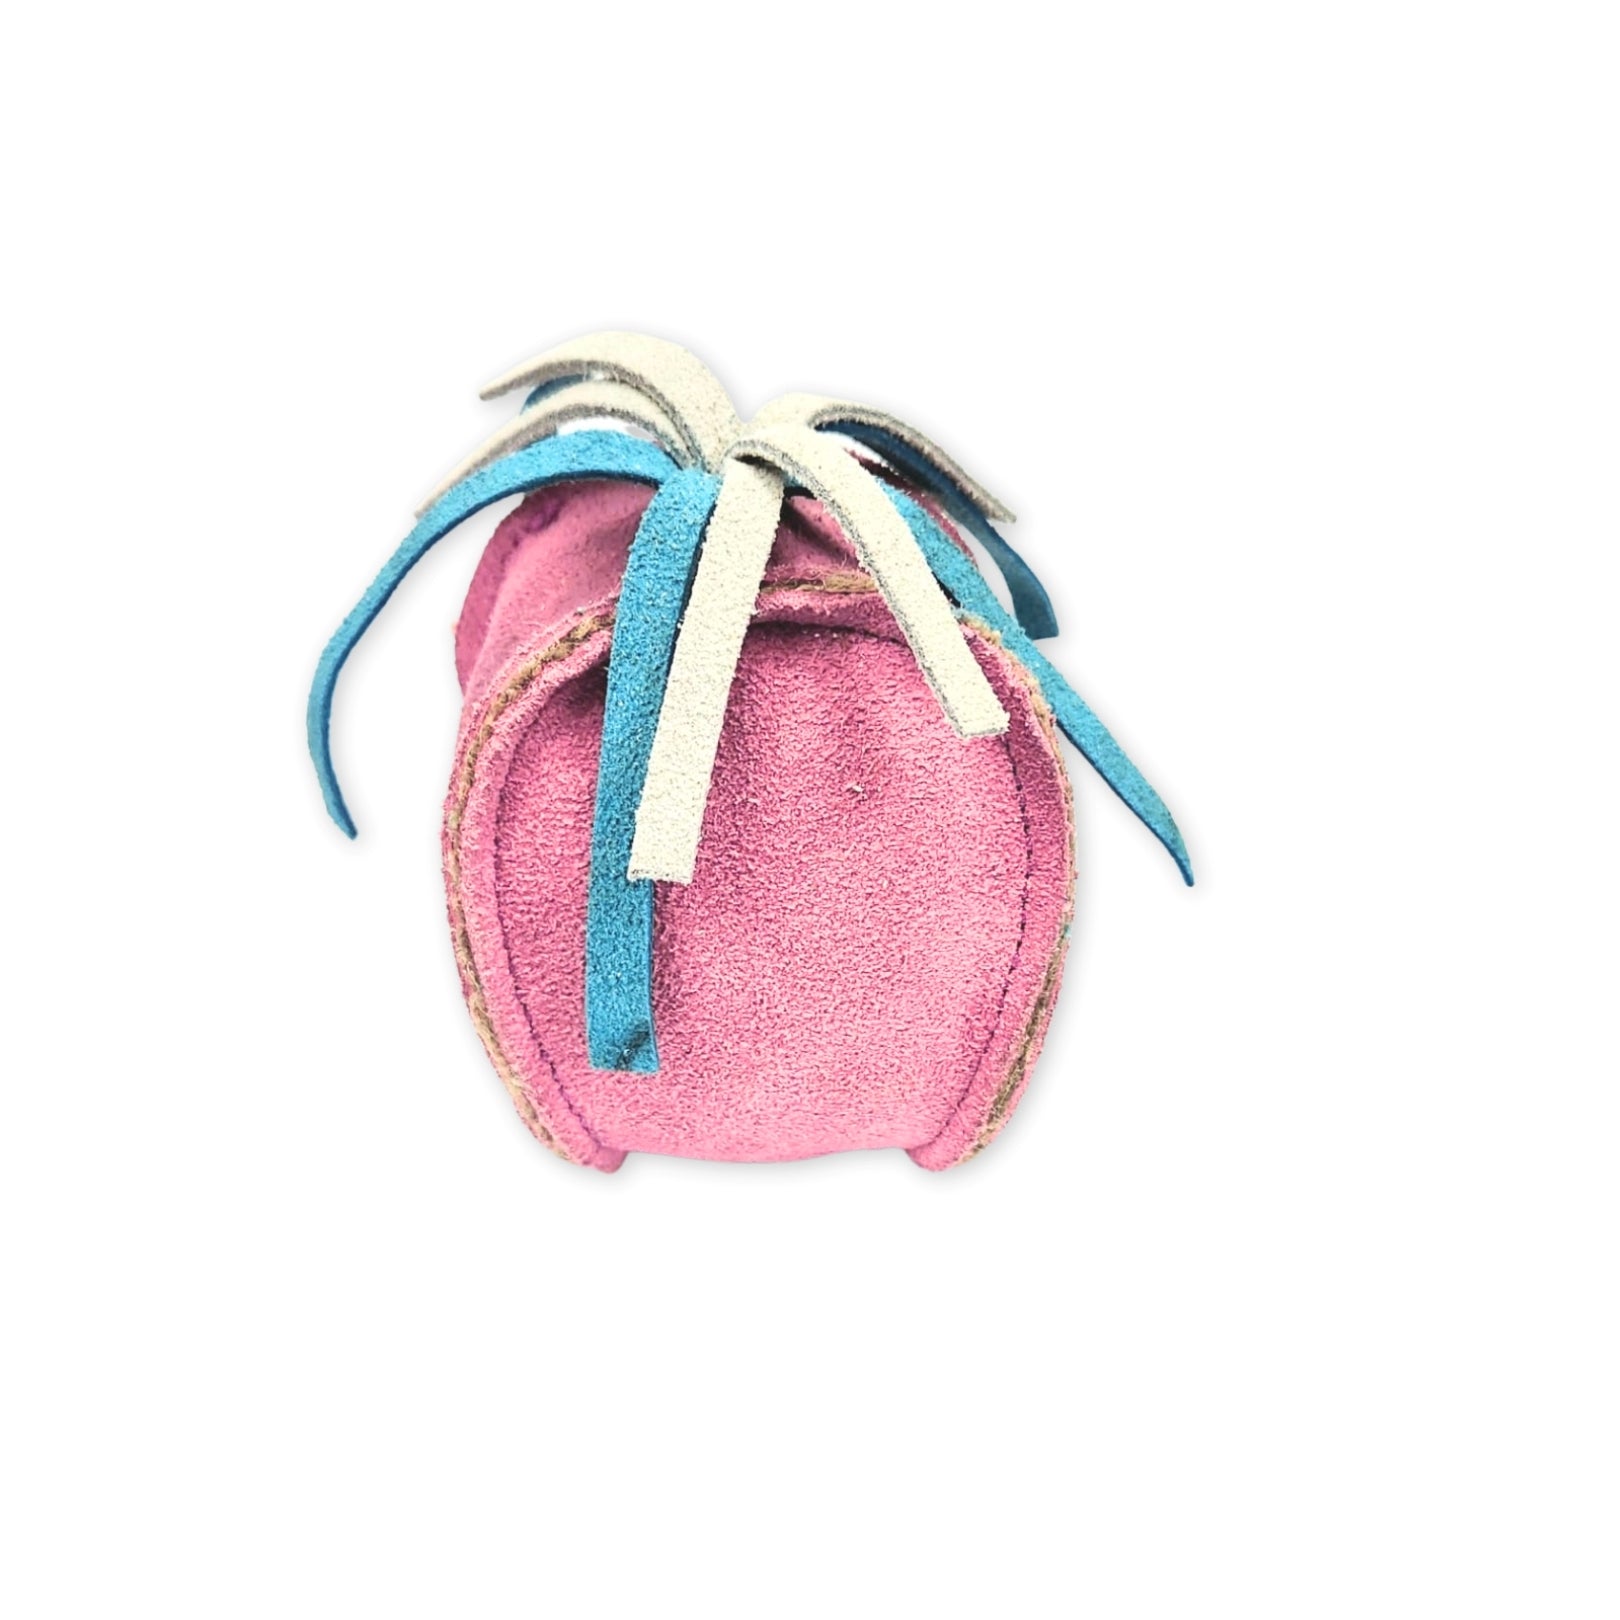 A small pink sustainable Bobble Sea Urchin dog toy pouch with blue and cream ribbons tied in a bow on top, isolated on a white background, suggesting a charming eco-friendly pet toy container by Georgie Paws.